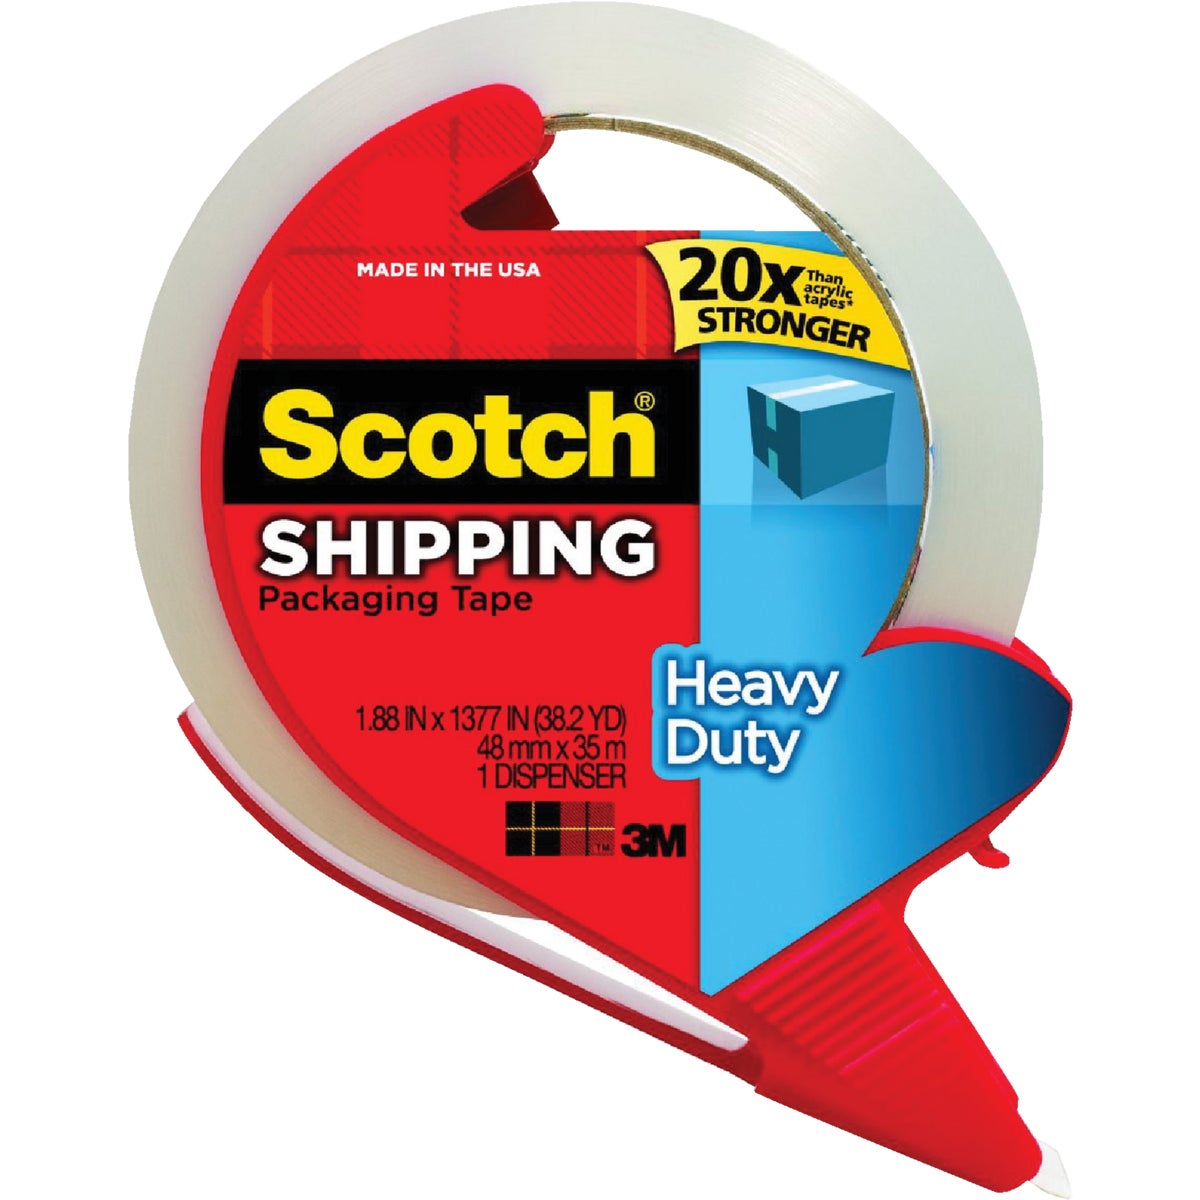 Item 970836, High-performance, heavy-duty packaging tape with convenient refillable 